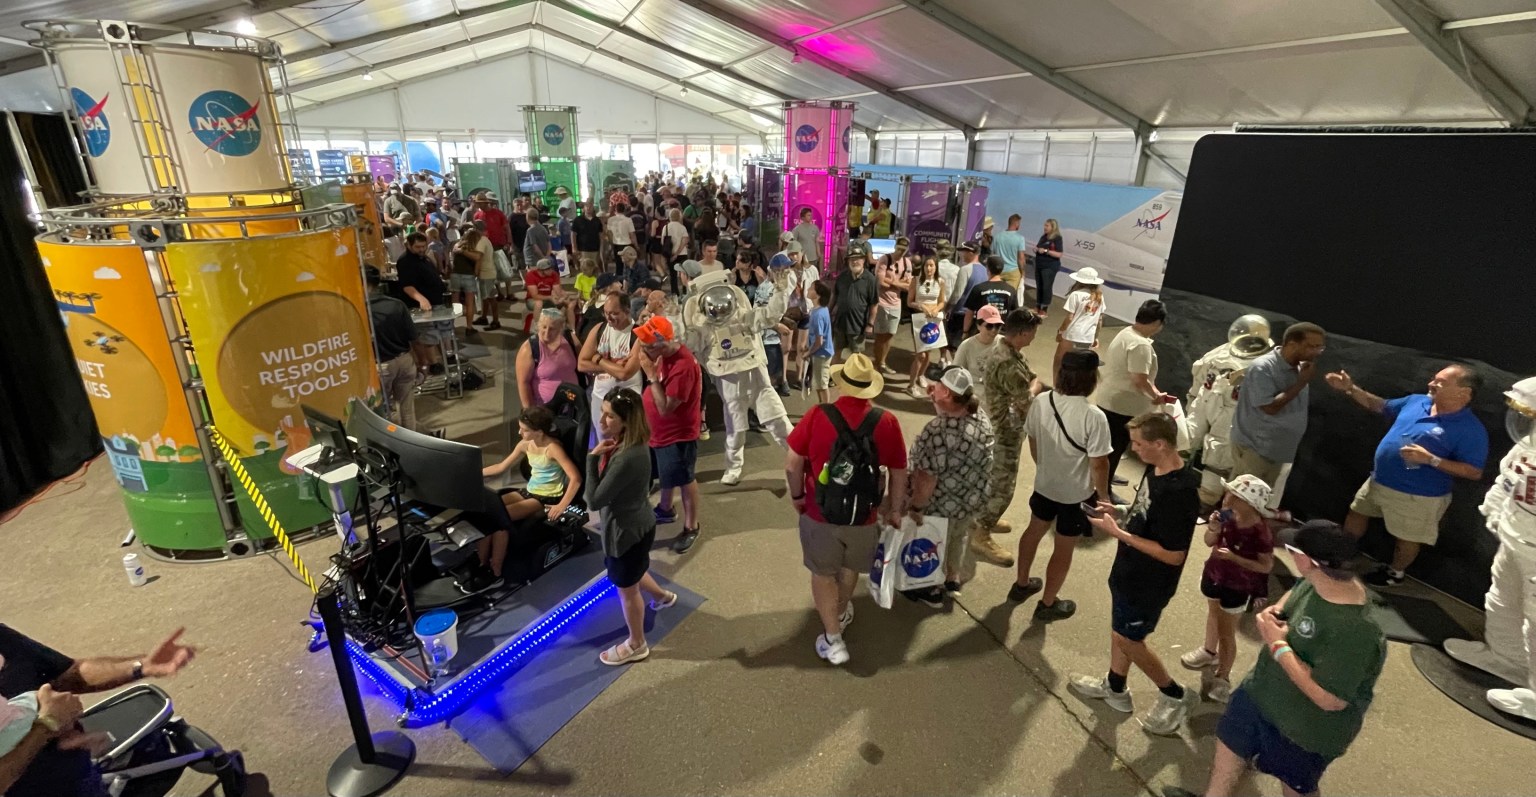 Many people wander through a large, enclosed tent. They stop to view or experience aeronautics-and space related-interactive displays.